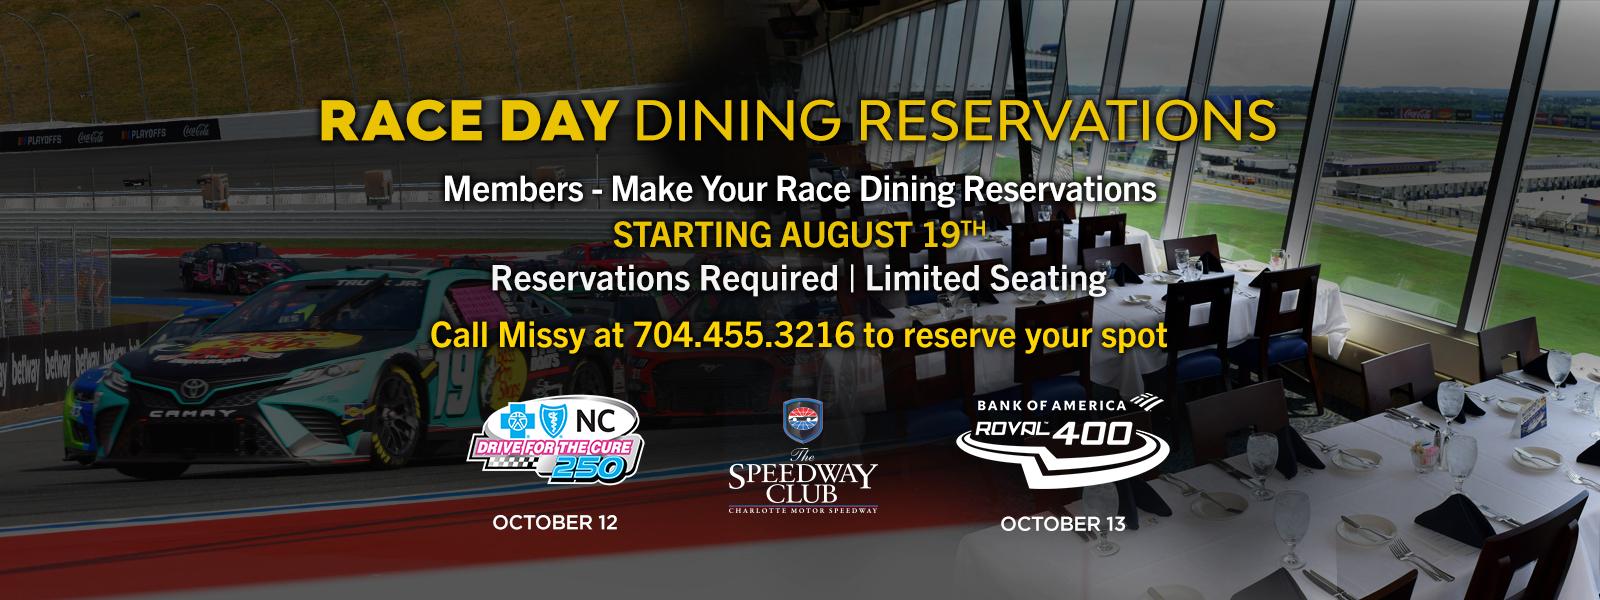 Roval 400 Race Dining Reservations